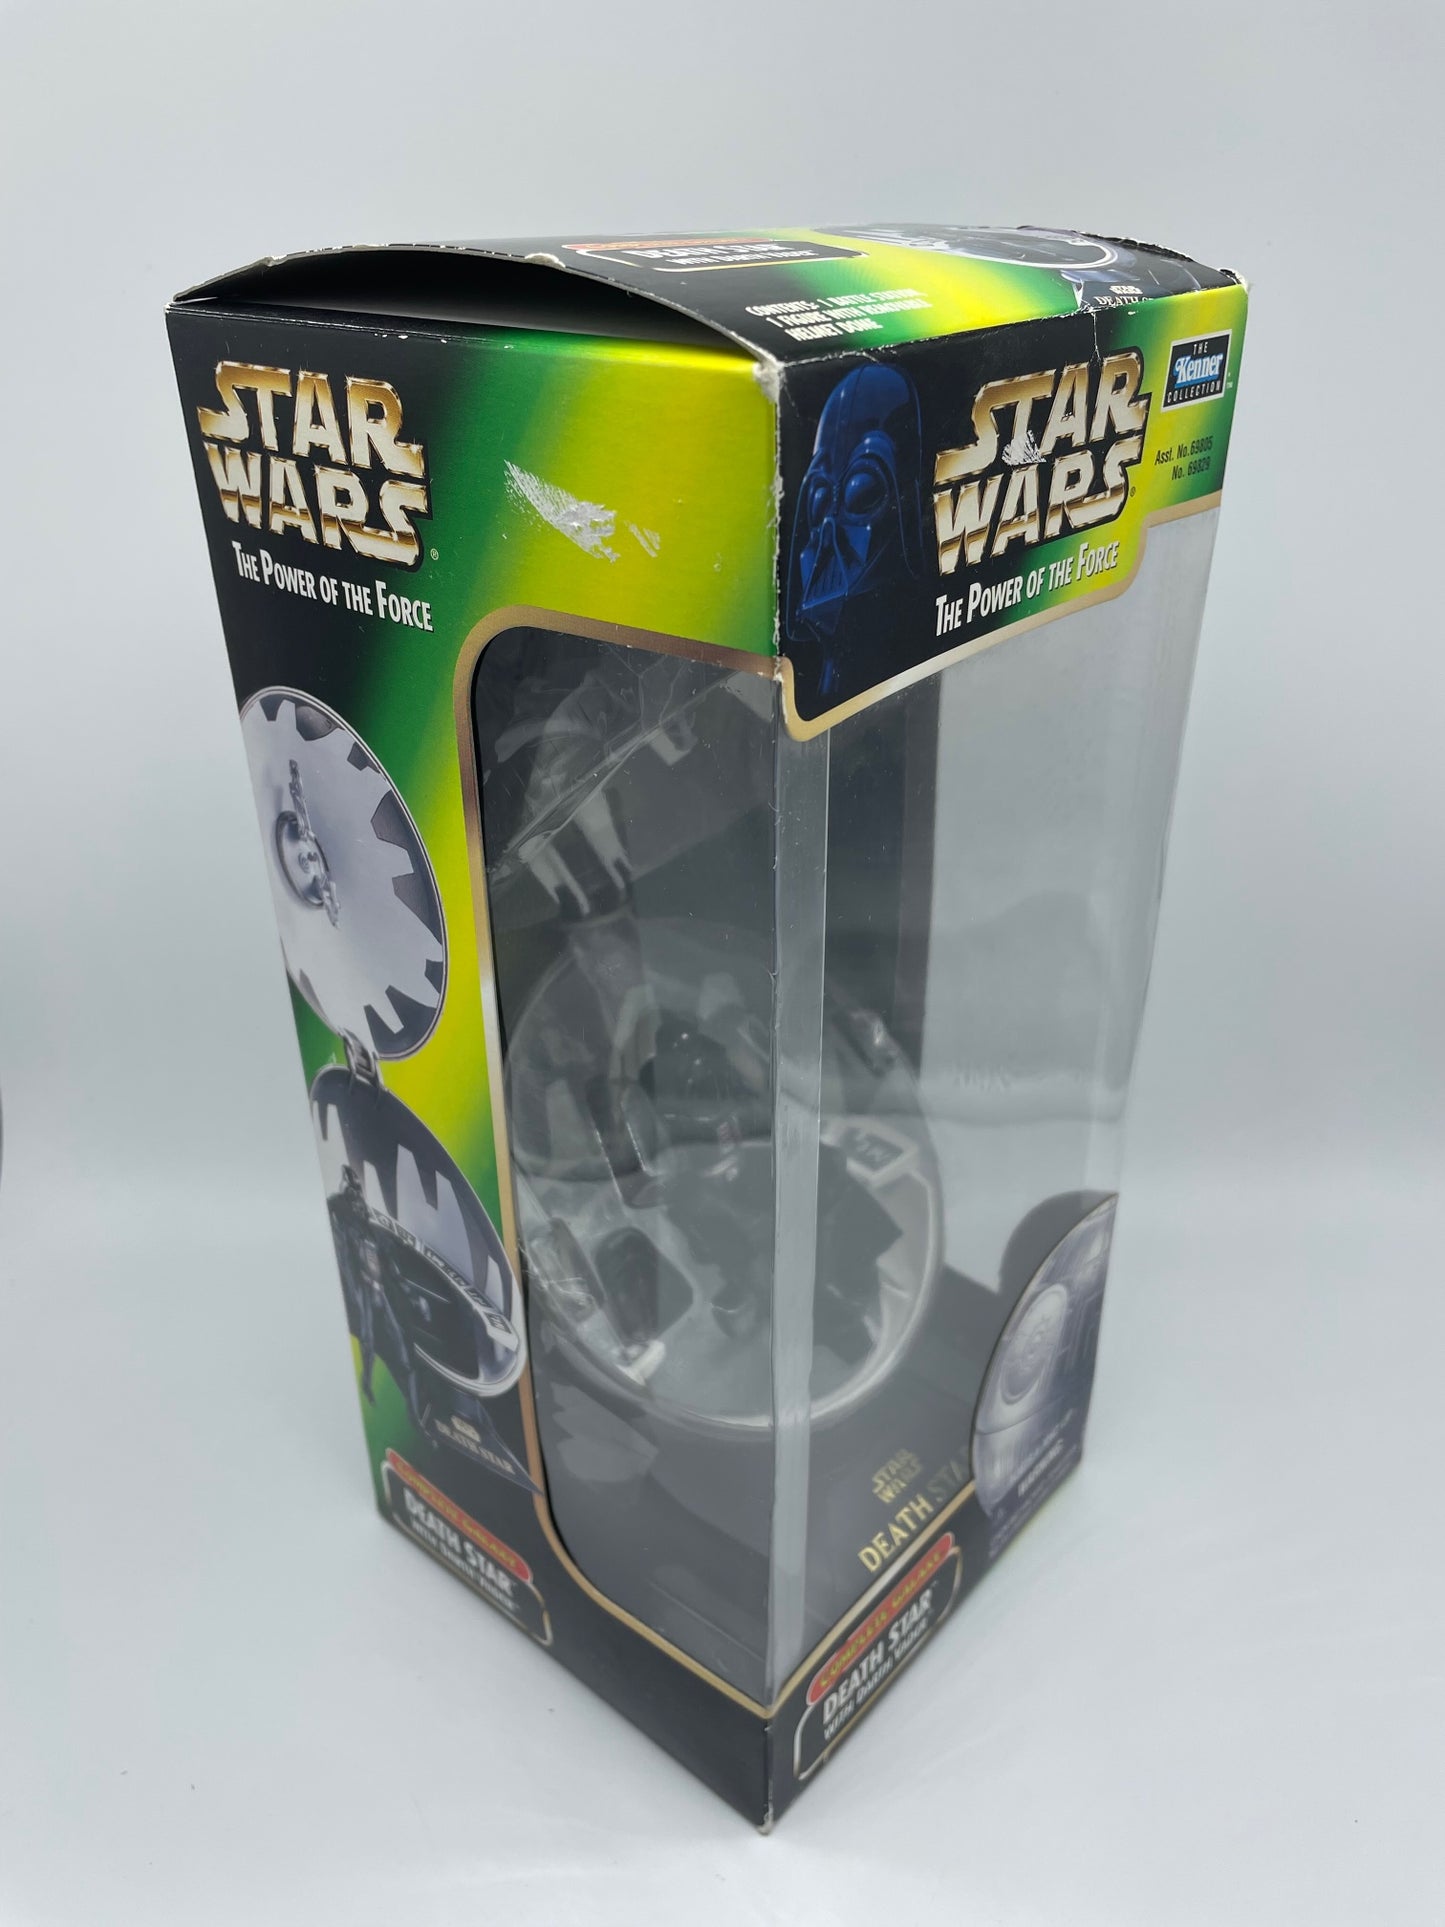 Power of the Force Darth Vader and Death Star Set, Hasbro 1998